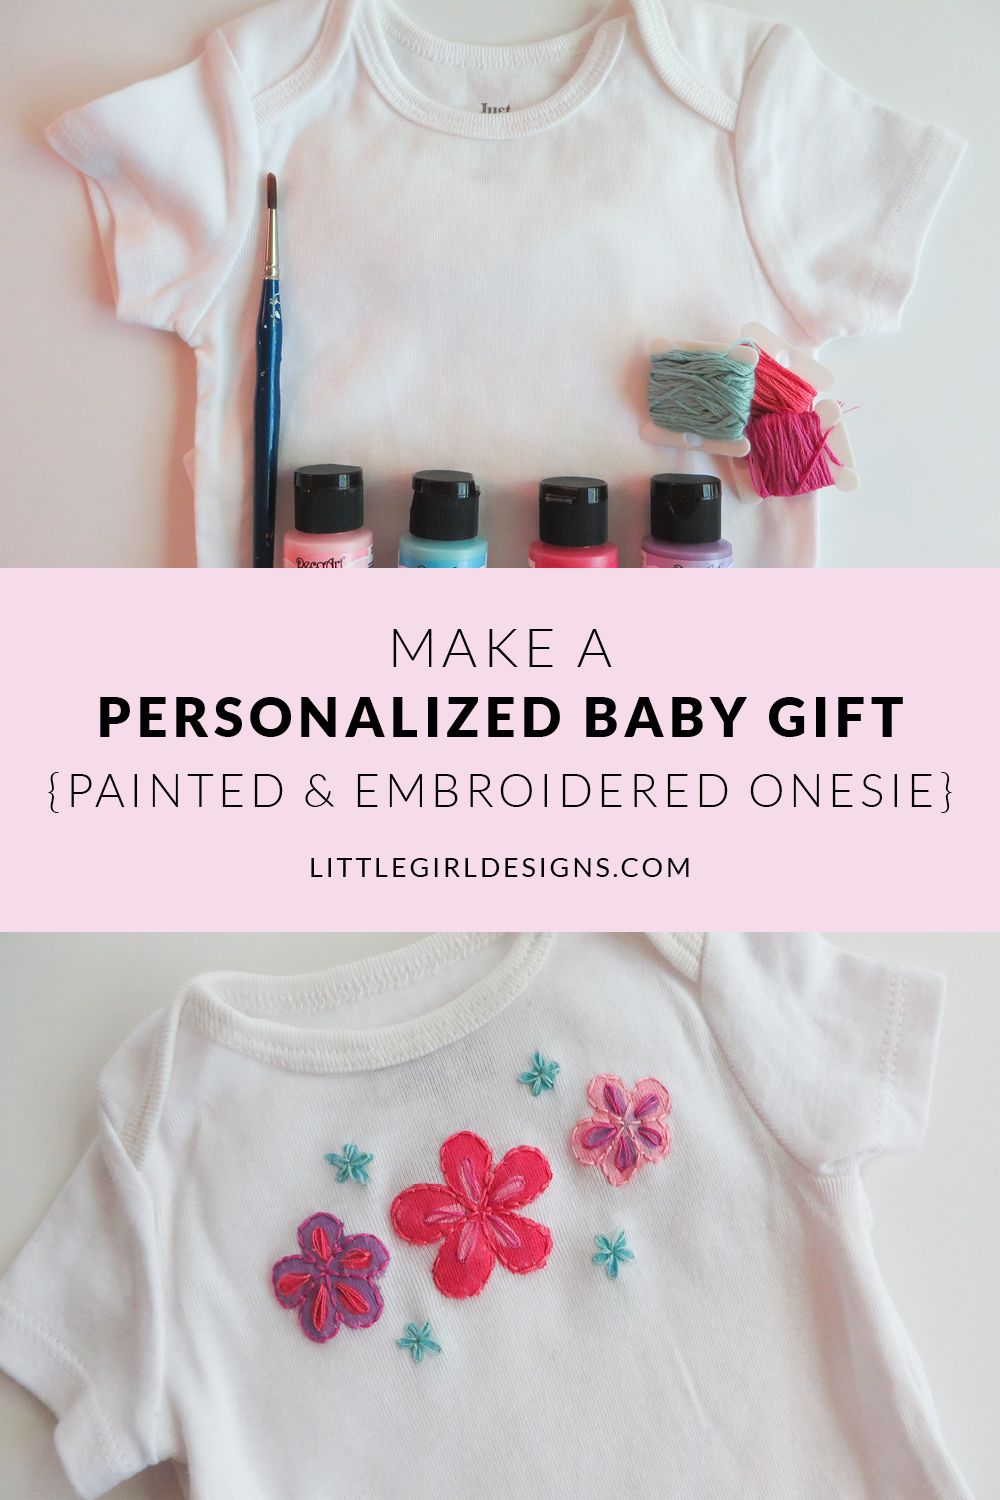 Personalized Baby Gift - Painted and embroidered baby outfit. Make a sweet baby shower gift for a new baby with my tutorial. This is such a simple project and you can completely personalize the shirt for the baby! @littlegirldesigns.com